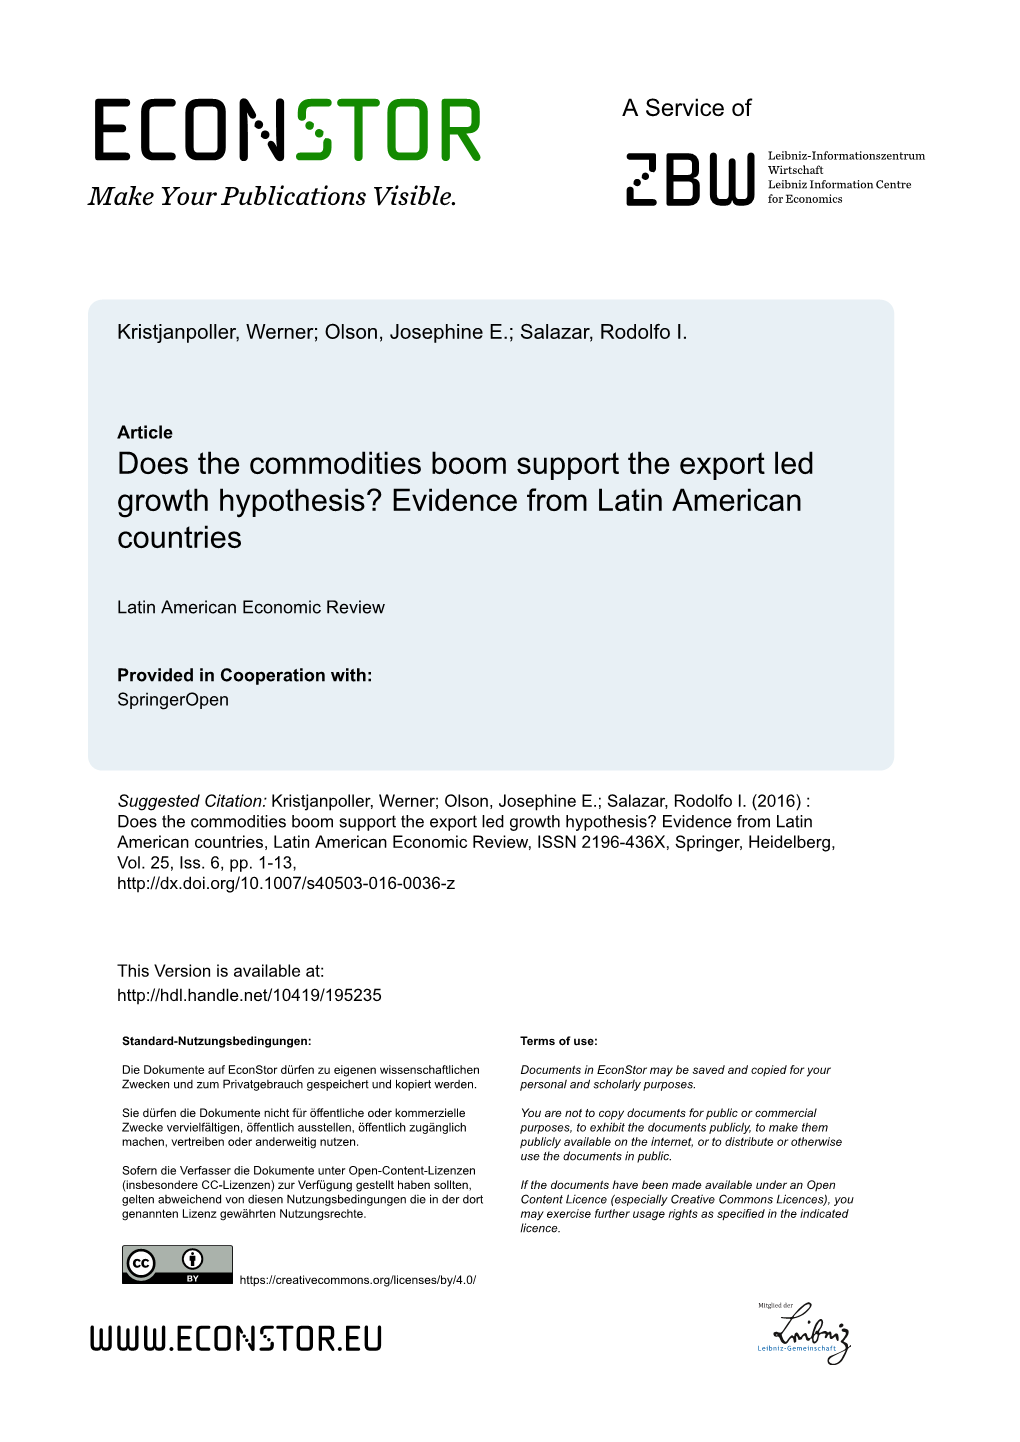 Does the Commodities Boom Support the Export Led Growth Hypothesis? Evidence from Latin American Countries